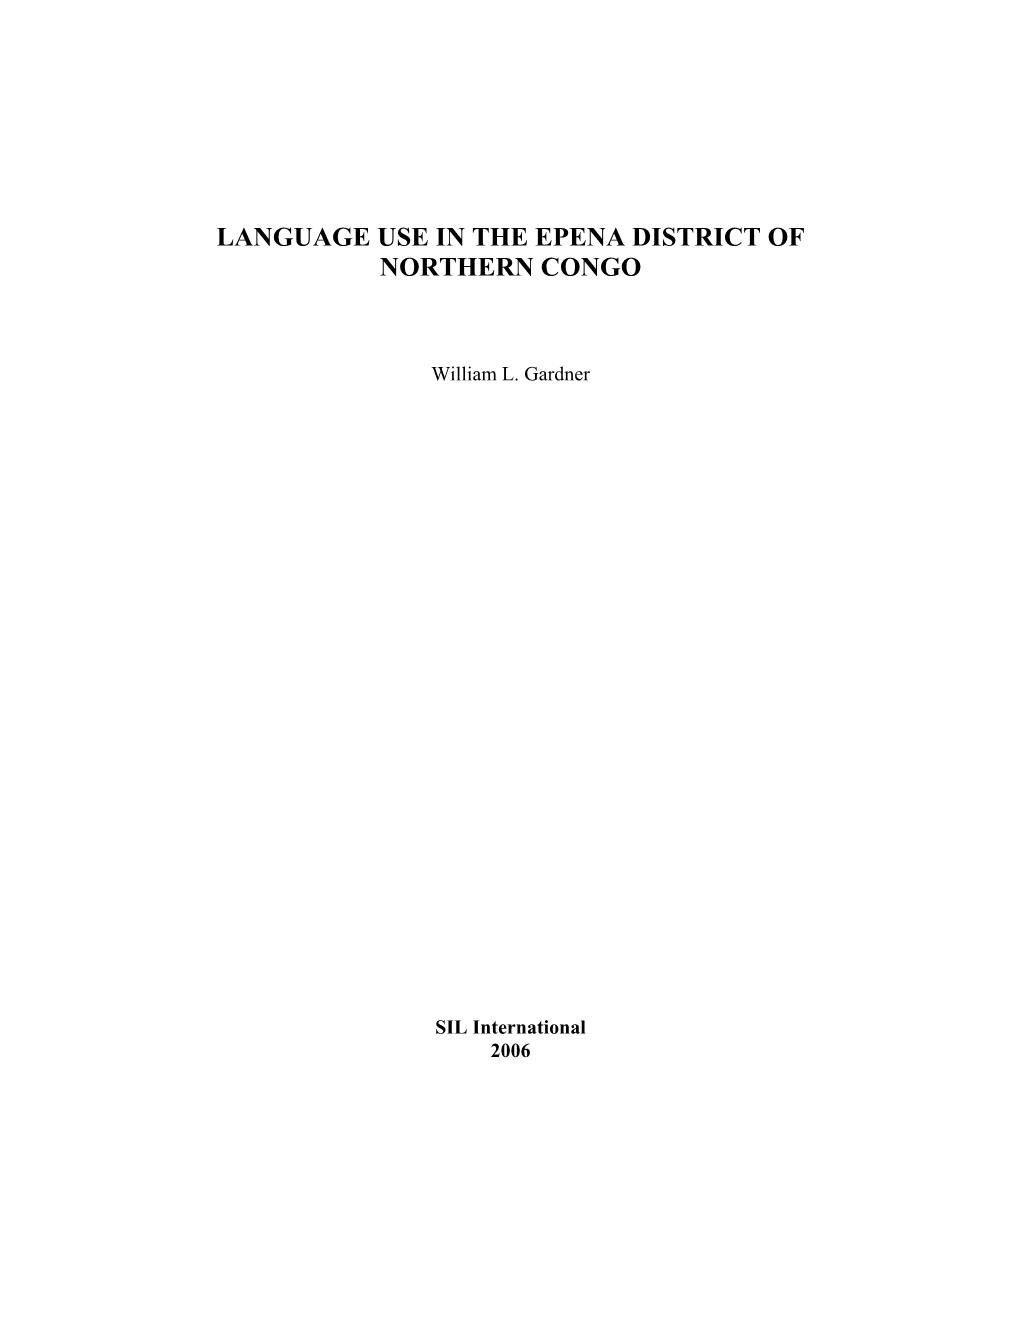 Language Use in the Epena District of Northern Congo